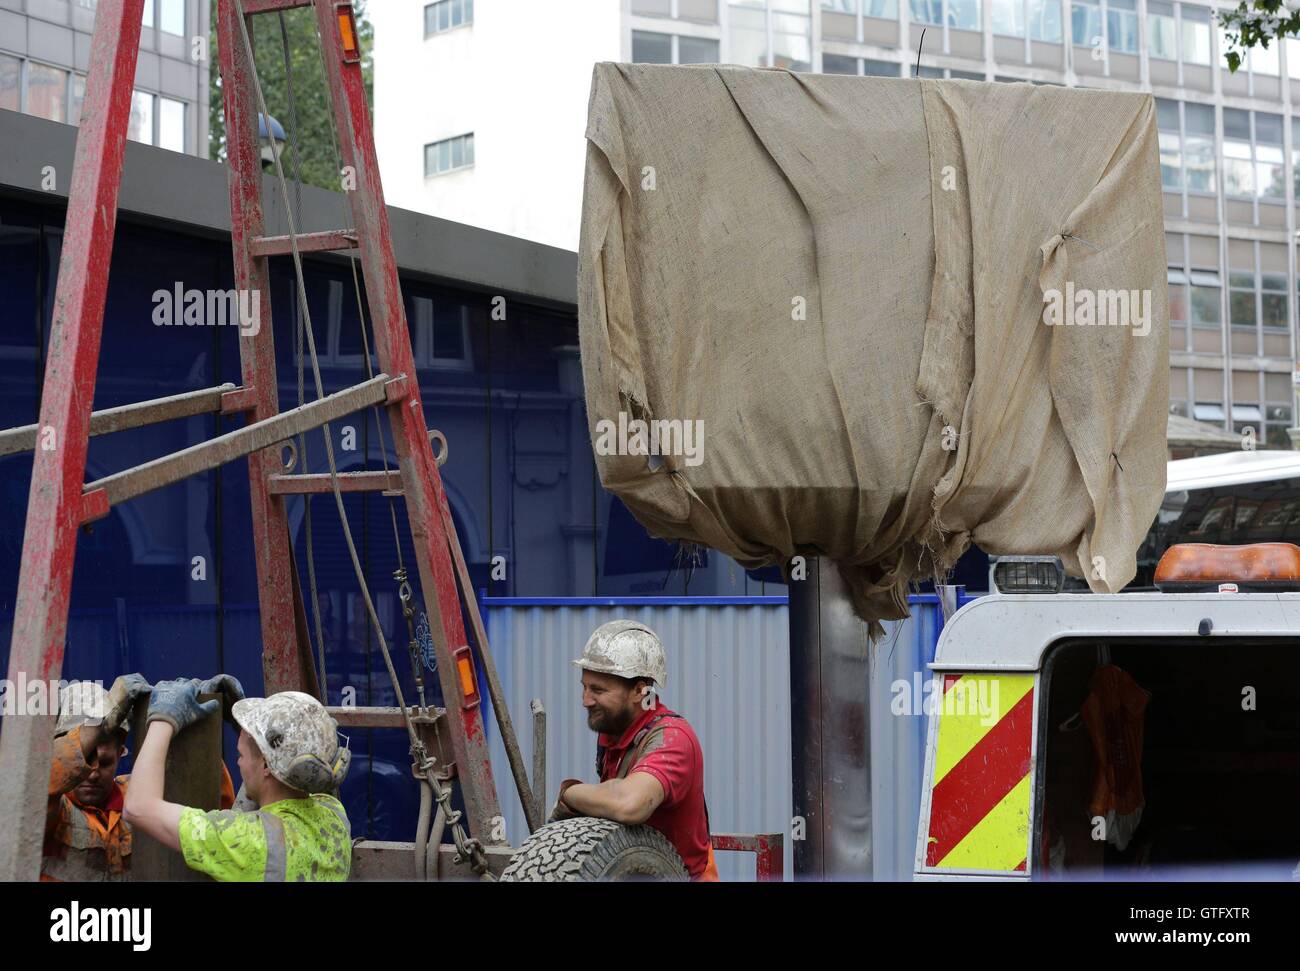 The iconic revolving sign in front of the New Scotland Yard headquarters of the Metropolitan Police in central London is wrapped in a sheet as workers make preparations to move it to the force's new base at the Curtis Green building on Victoria Embankment. Stock Photo